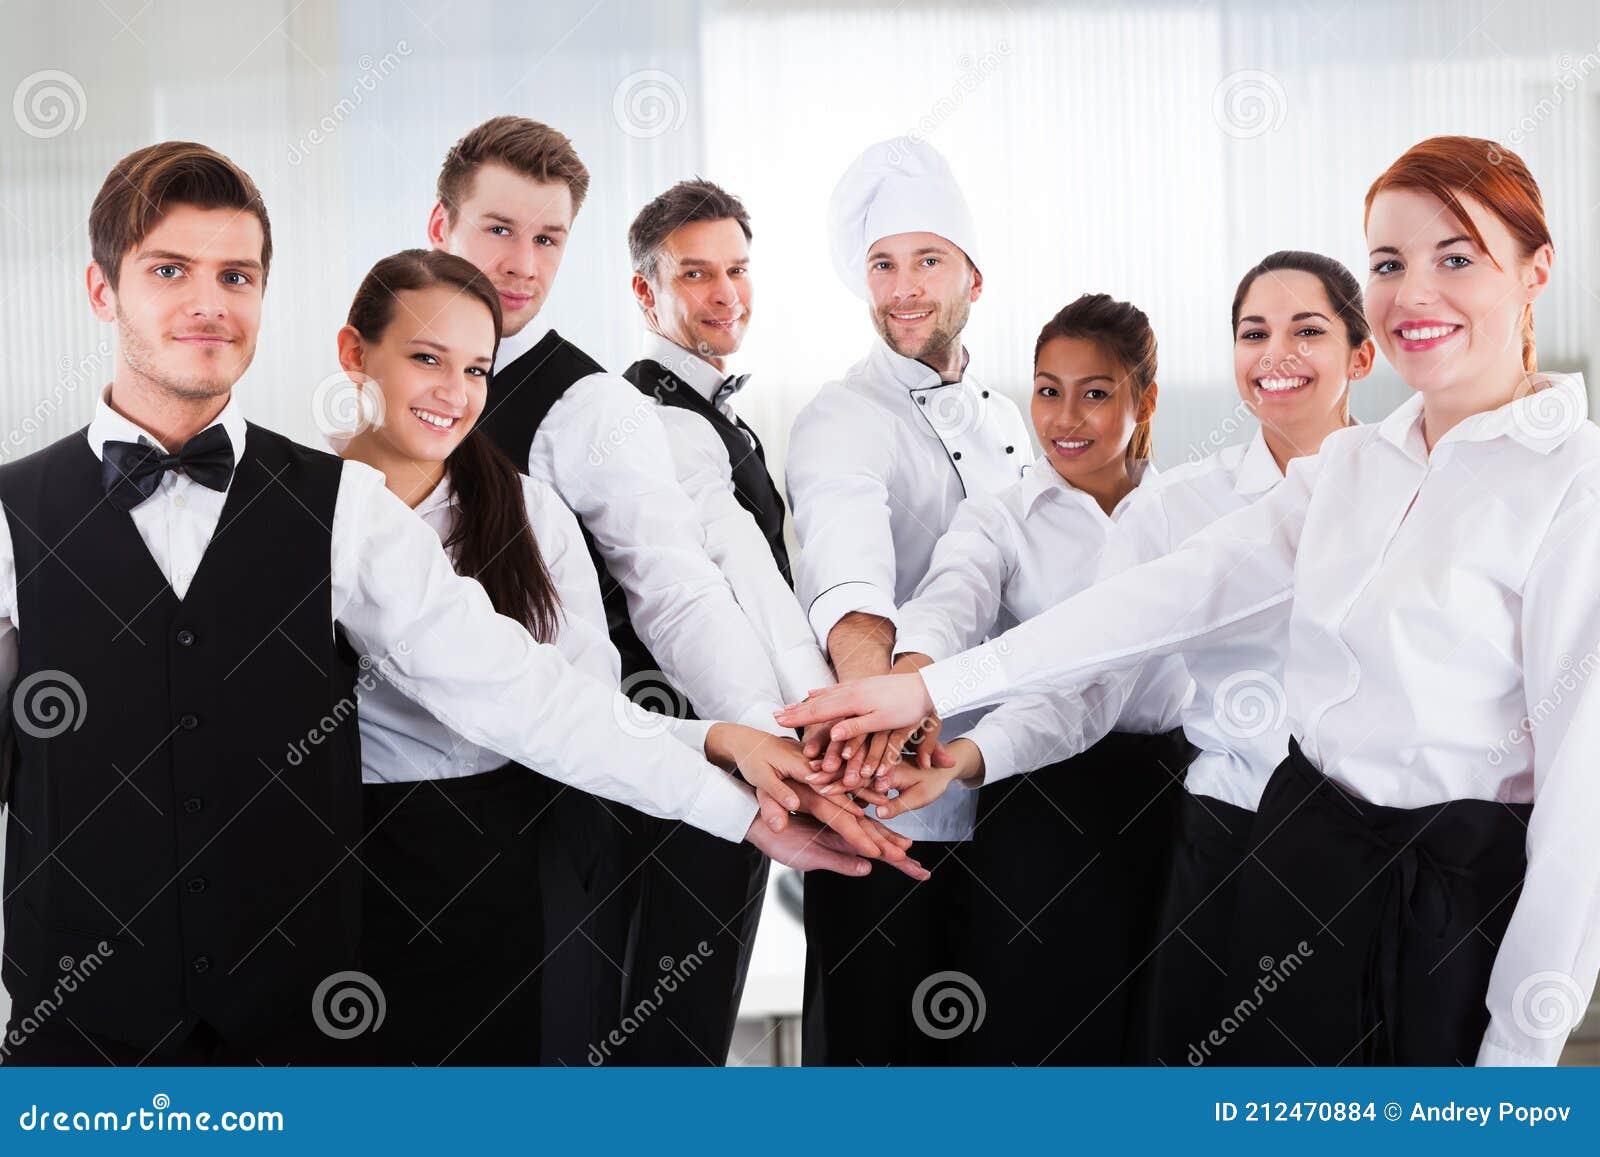 diverse team of waiters and hospitality staff people